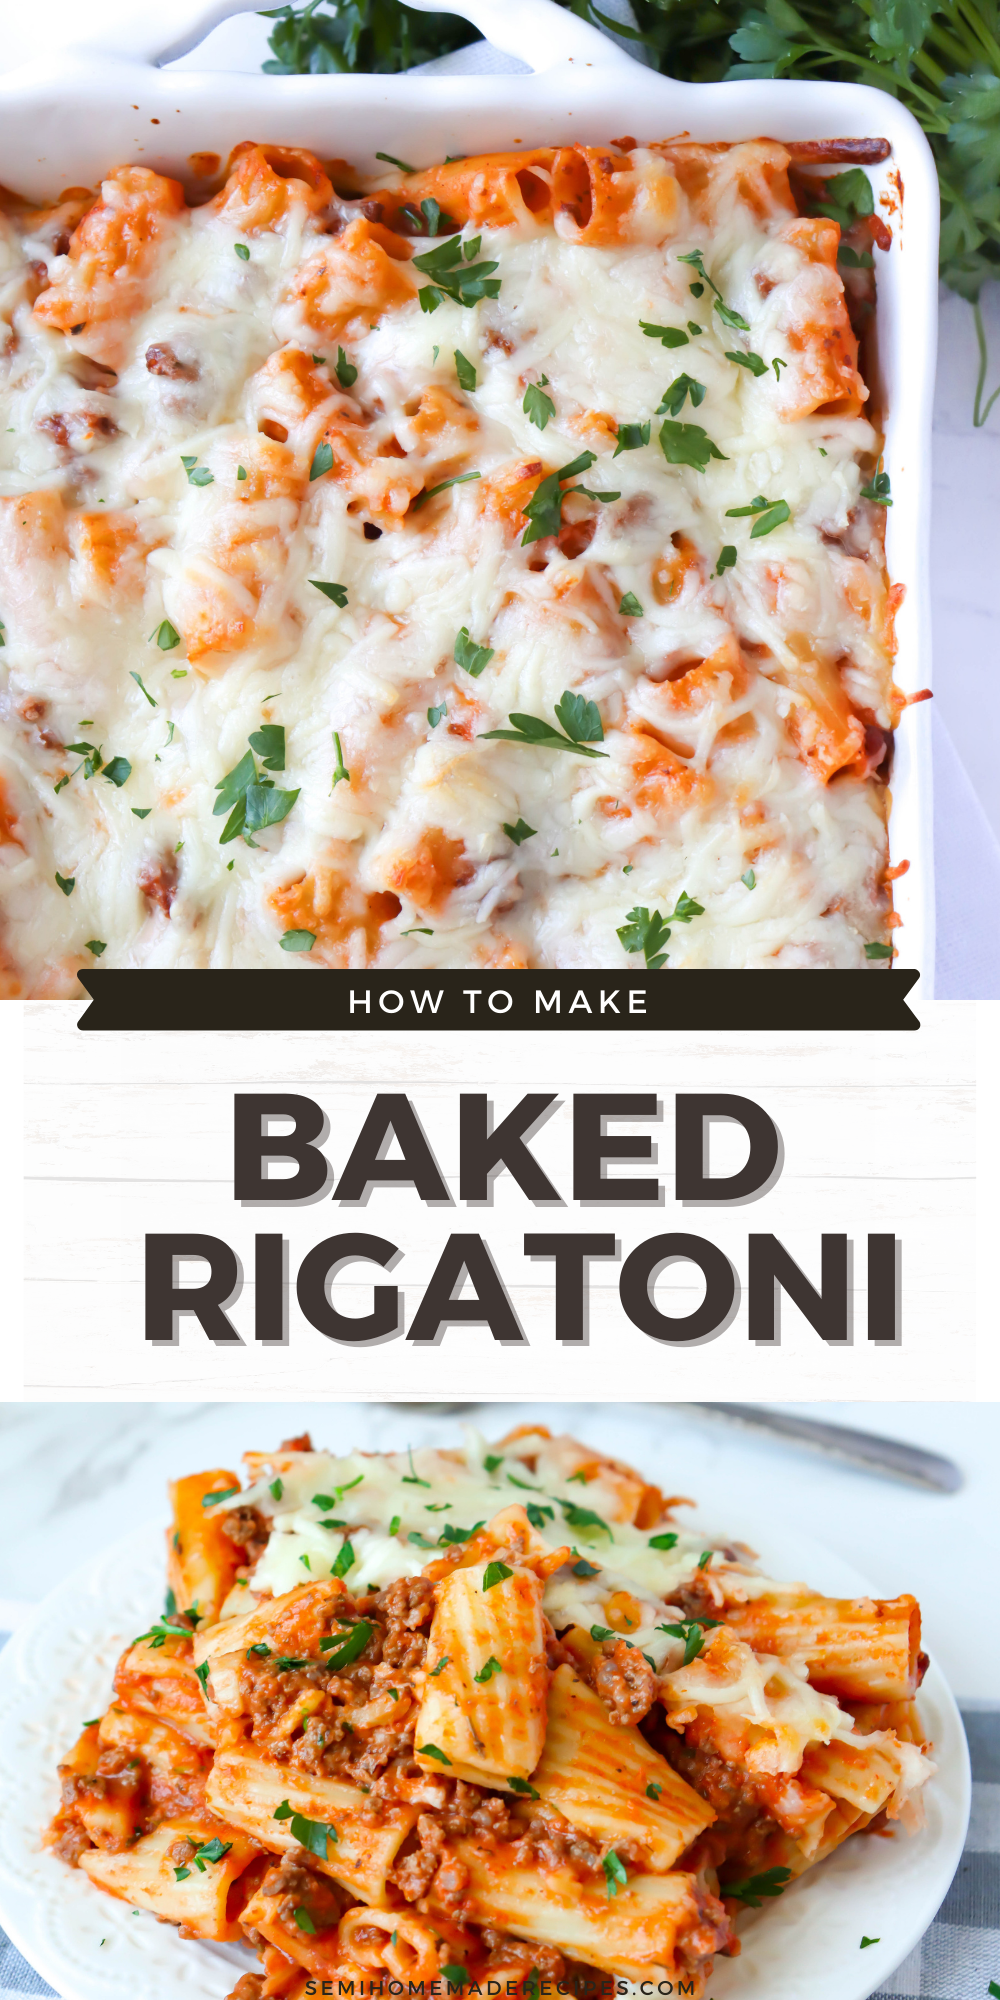 Baked Rigatoni is a rigatoni baked pasta casserole that is mixed with a wonderful meat sauce and topped with shredded mozzarella cheese.